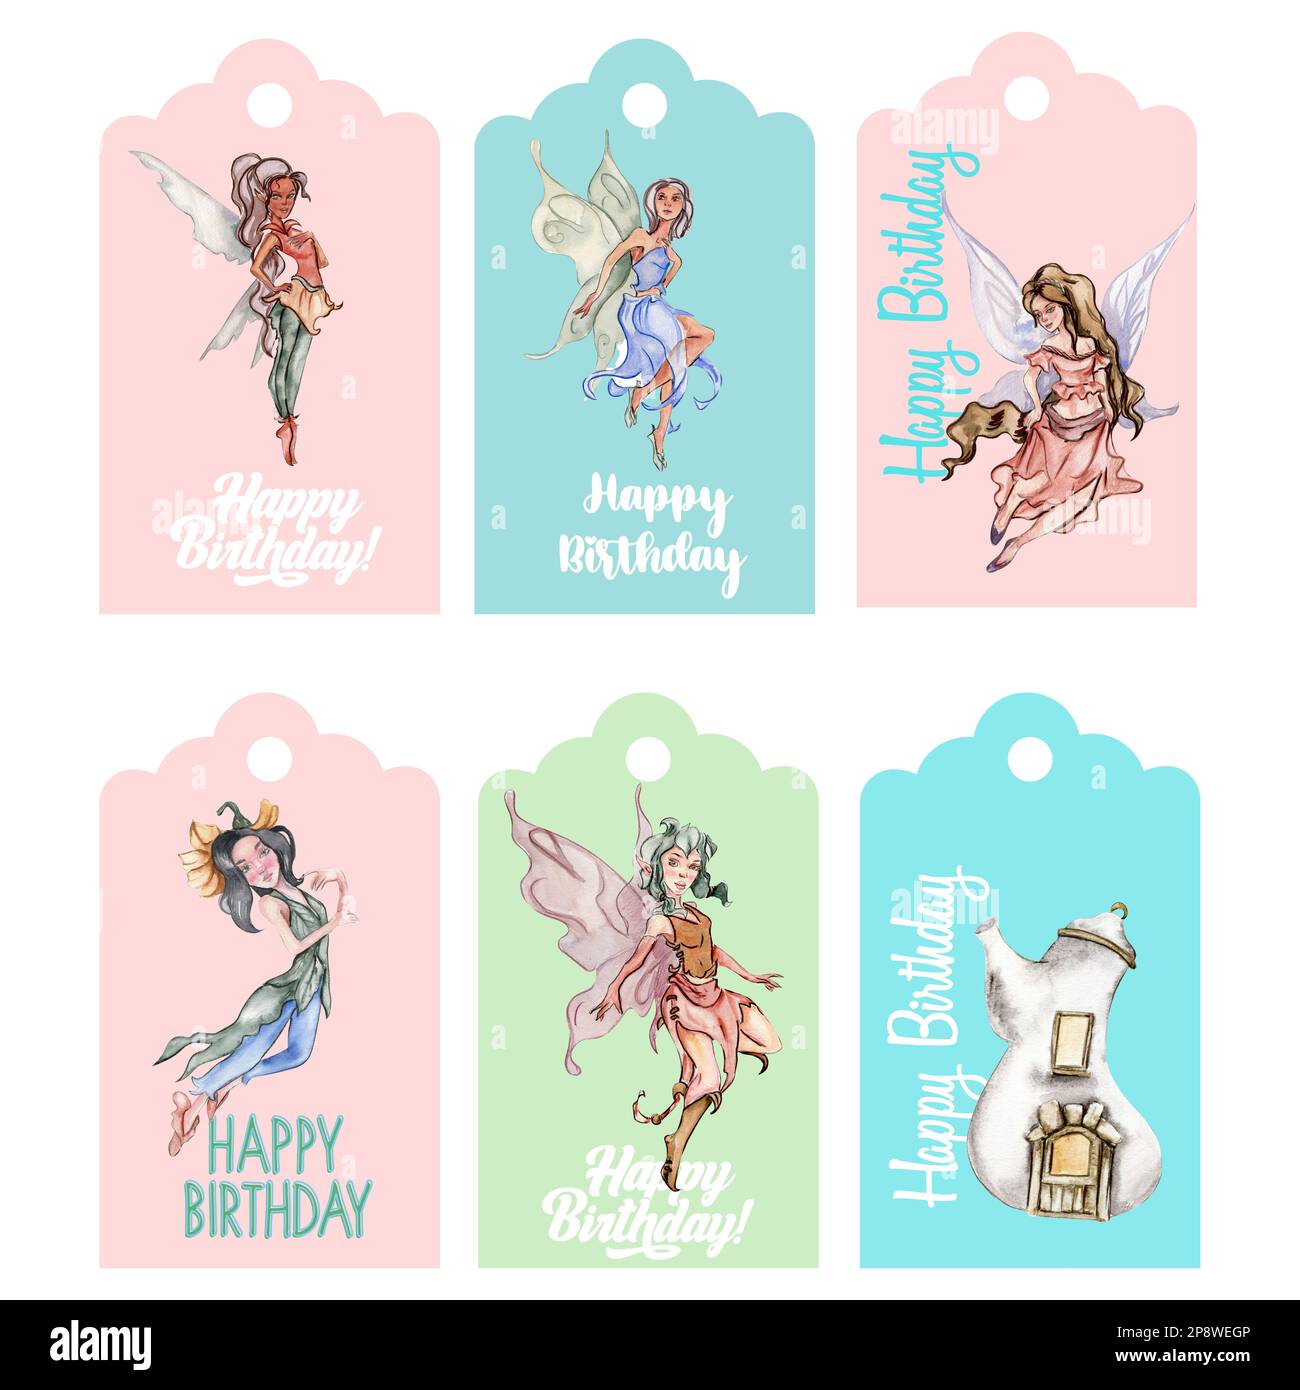 Set of happy birthday  tags. Illustration isolated on white background. Watercolor illustration fayry tales.Template label set.Wedding cake design. Stock Photo